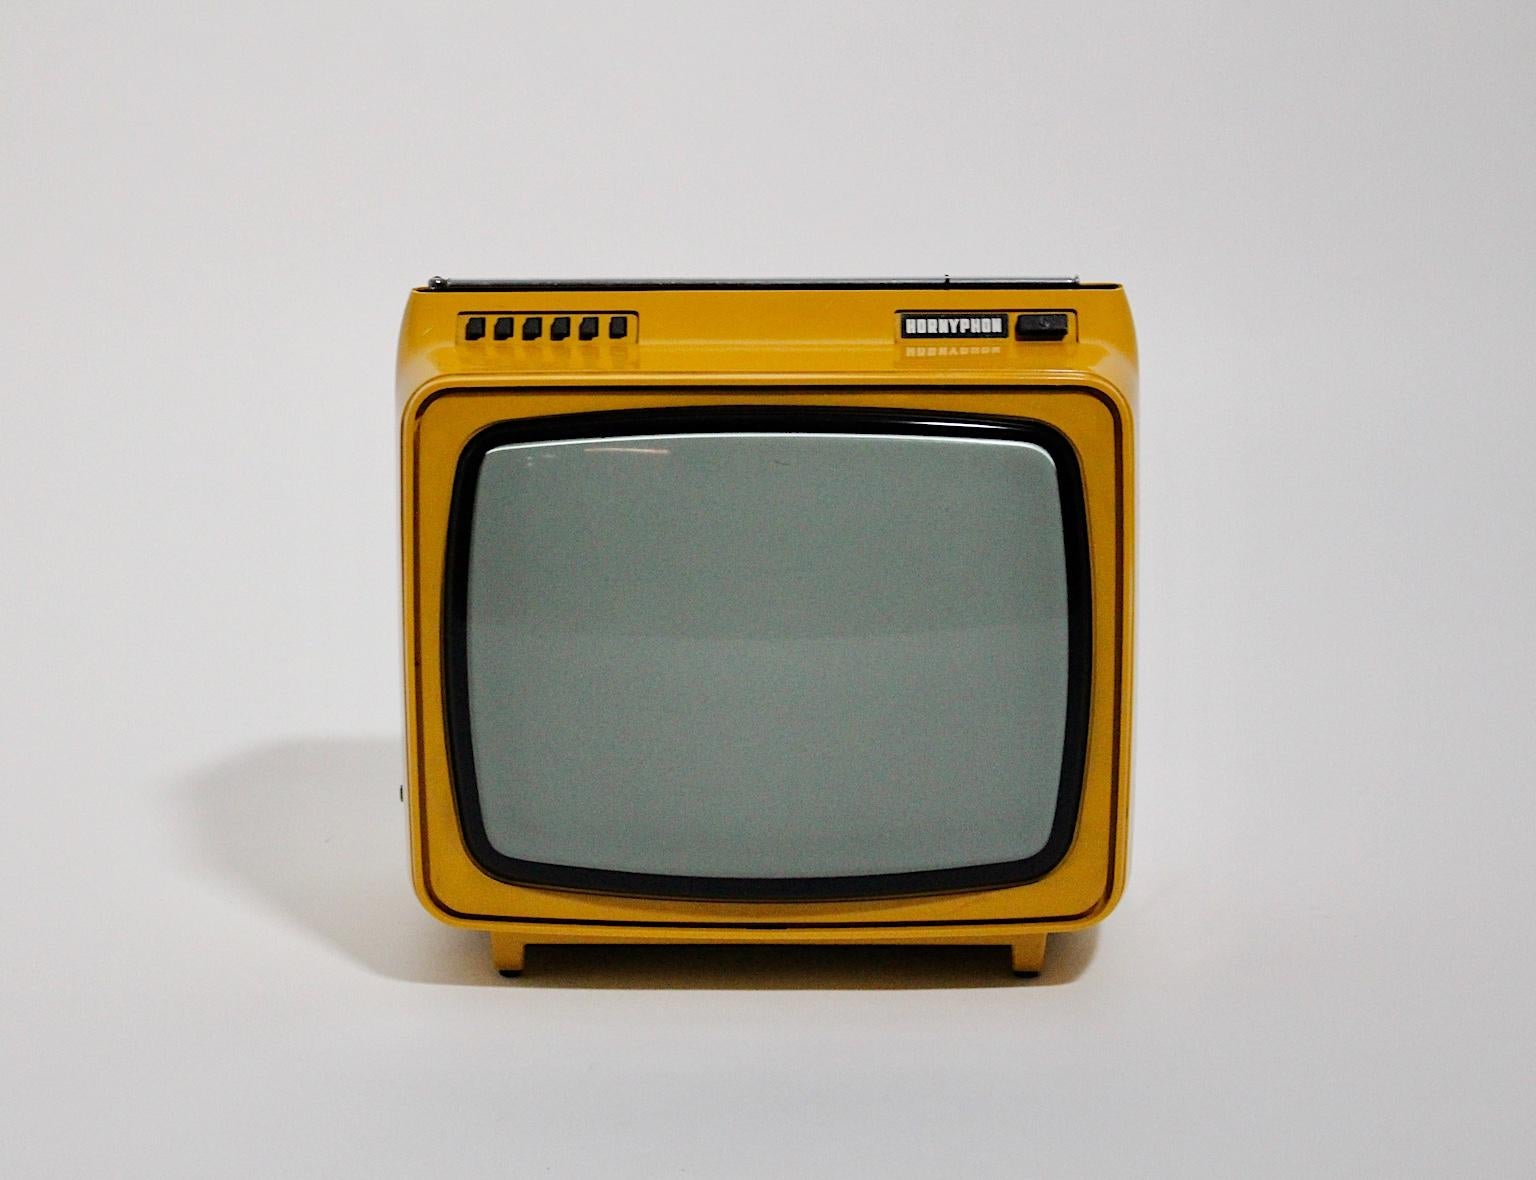 Space age yellow vintage plastic television, which is portable. The case of the TV was made of yellow plastic and is in very good condition, but no guarantee for working.
Approx. measures:
Width 34 cm
Depth 26 cm
Height 31 cm.